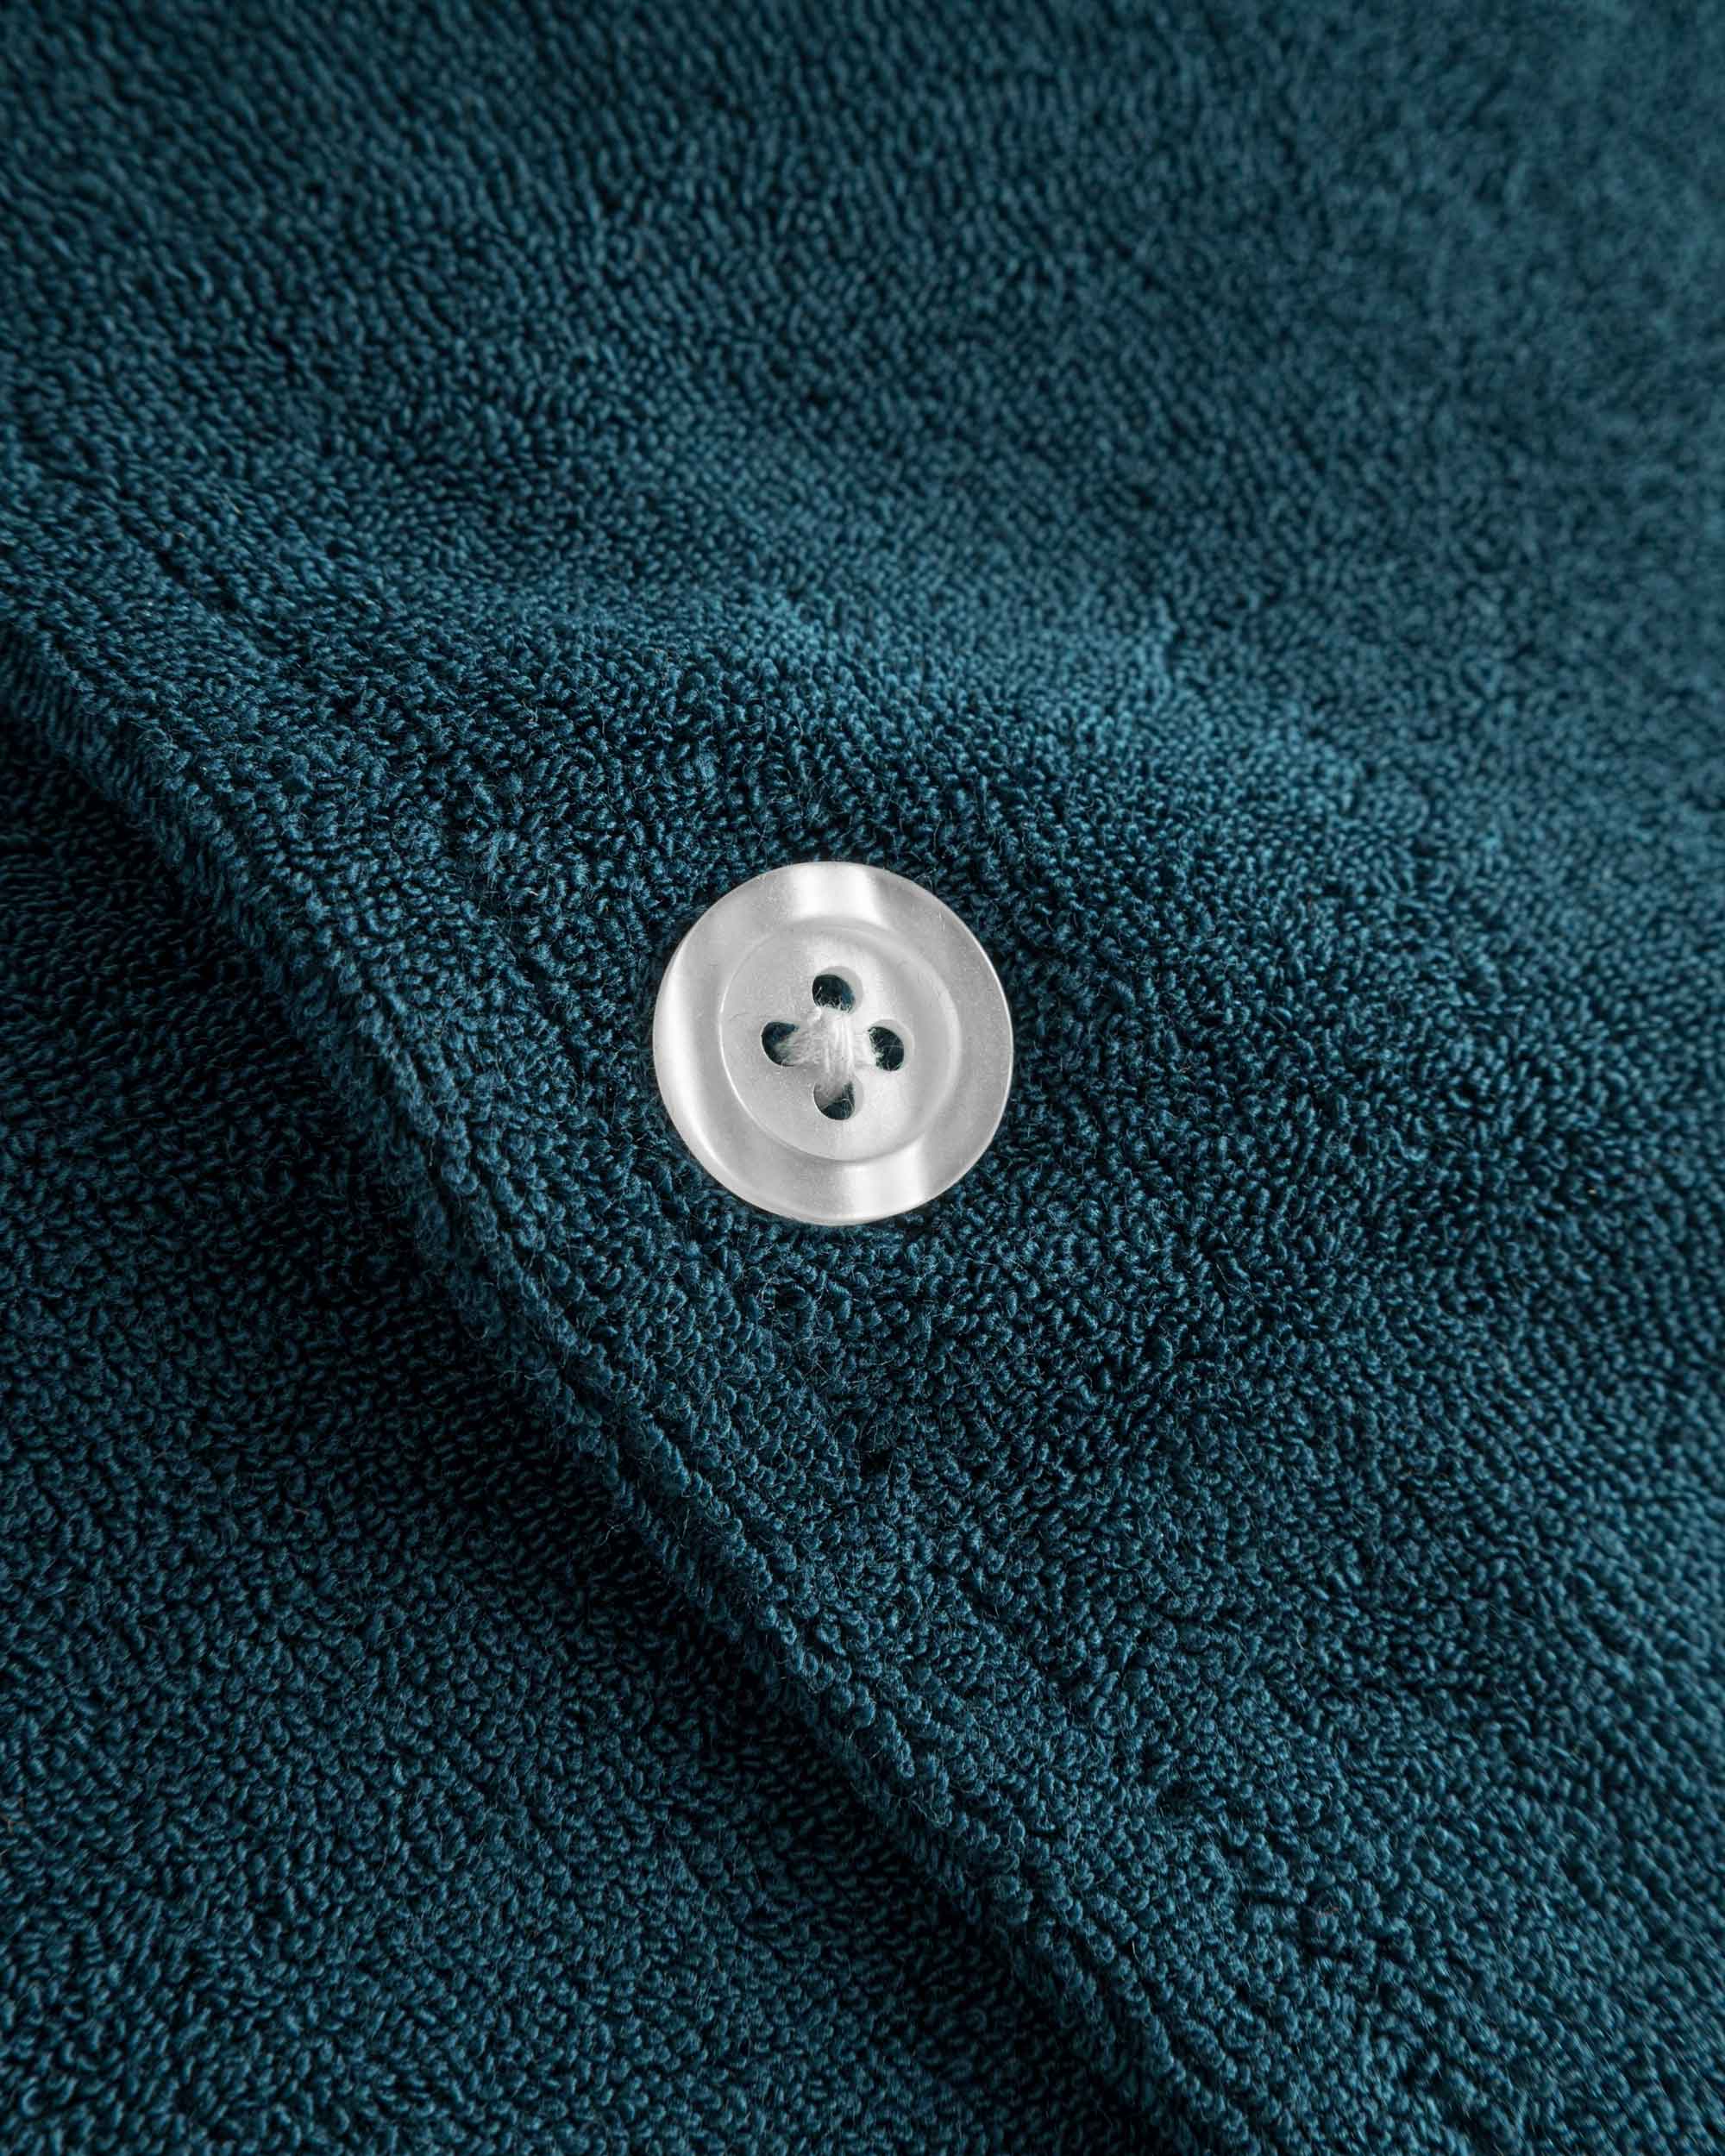 Close up of white pearl button on a navy blue short sleeve shirt.